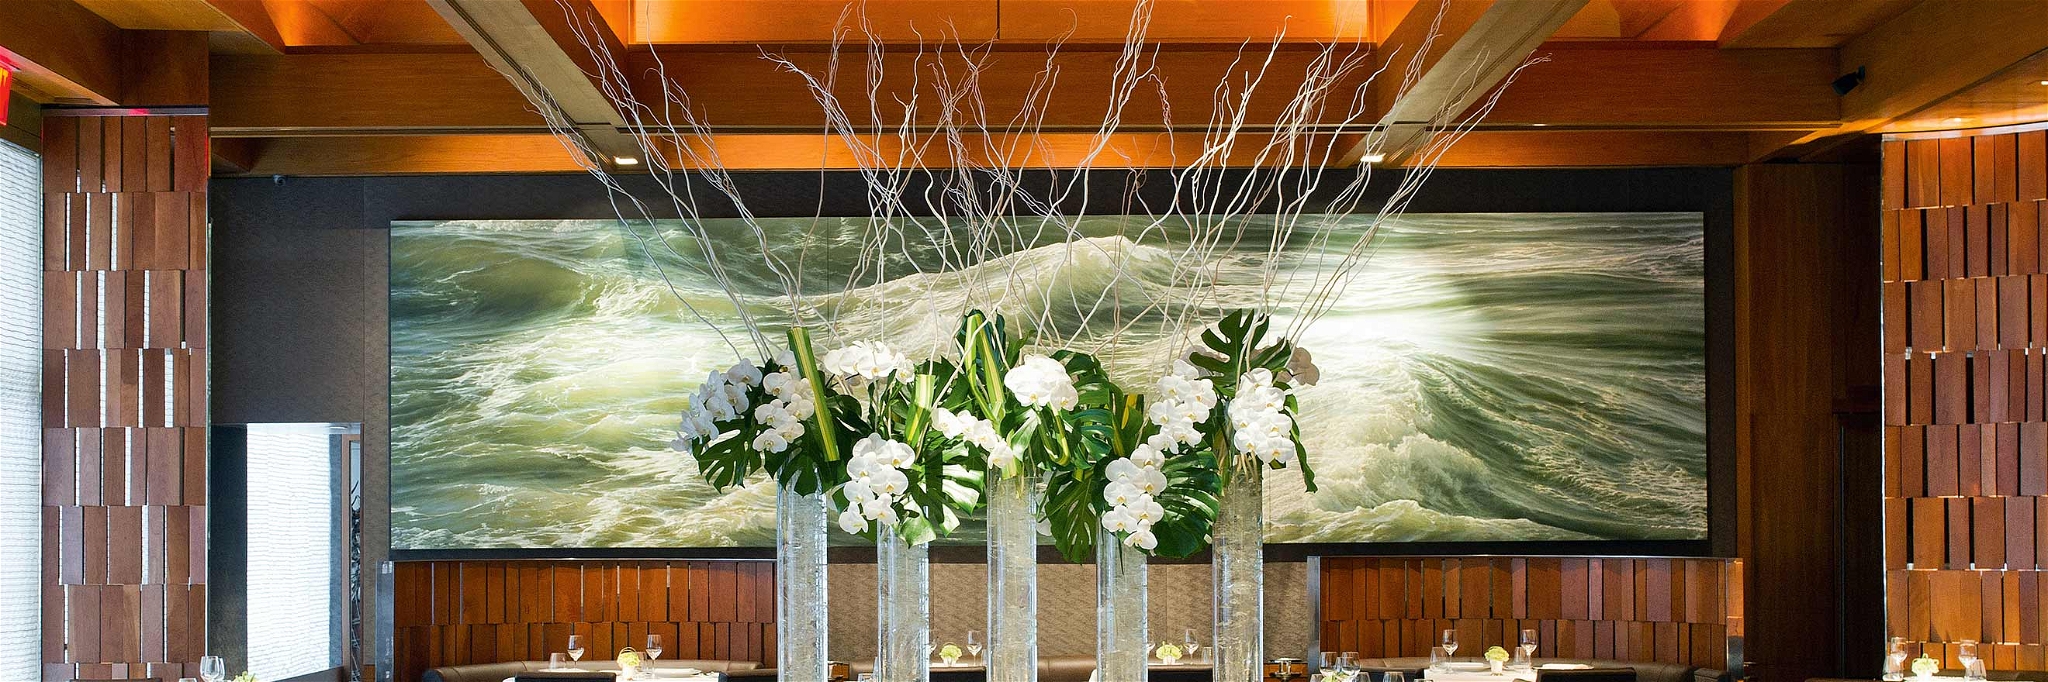 The waves of Brittany on the wall of the award-winning dining room of Le Bernardin.